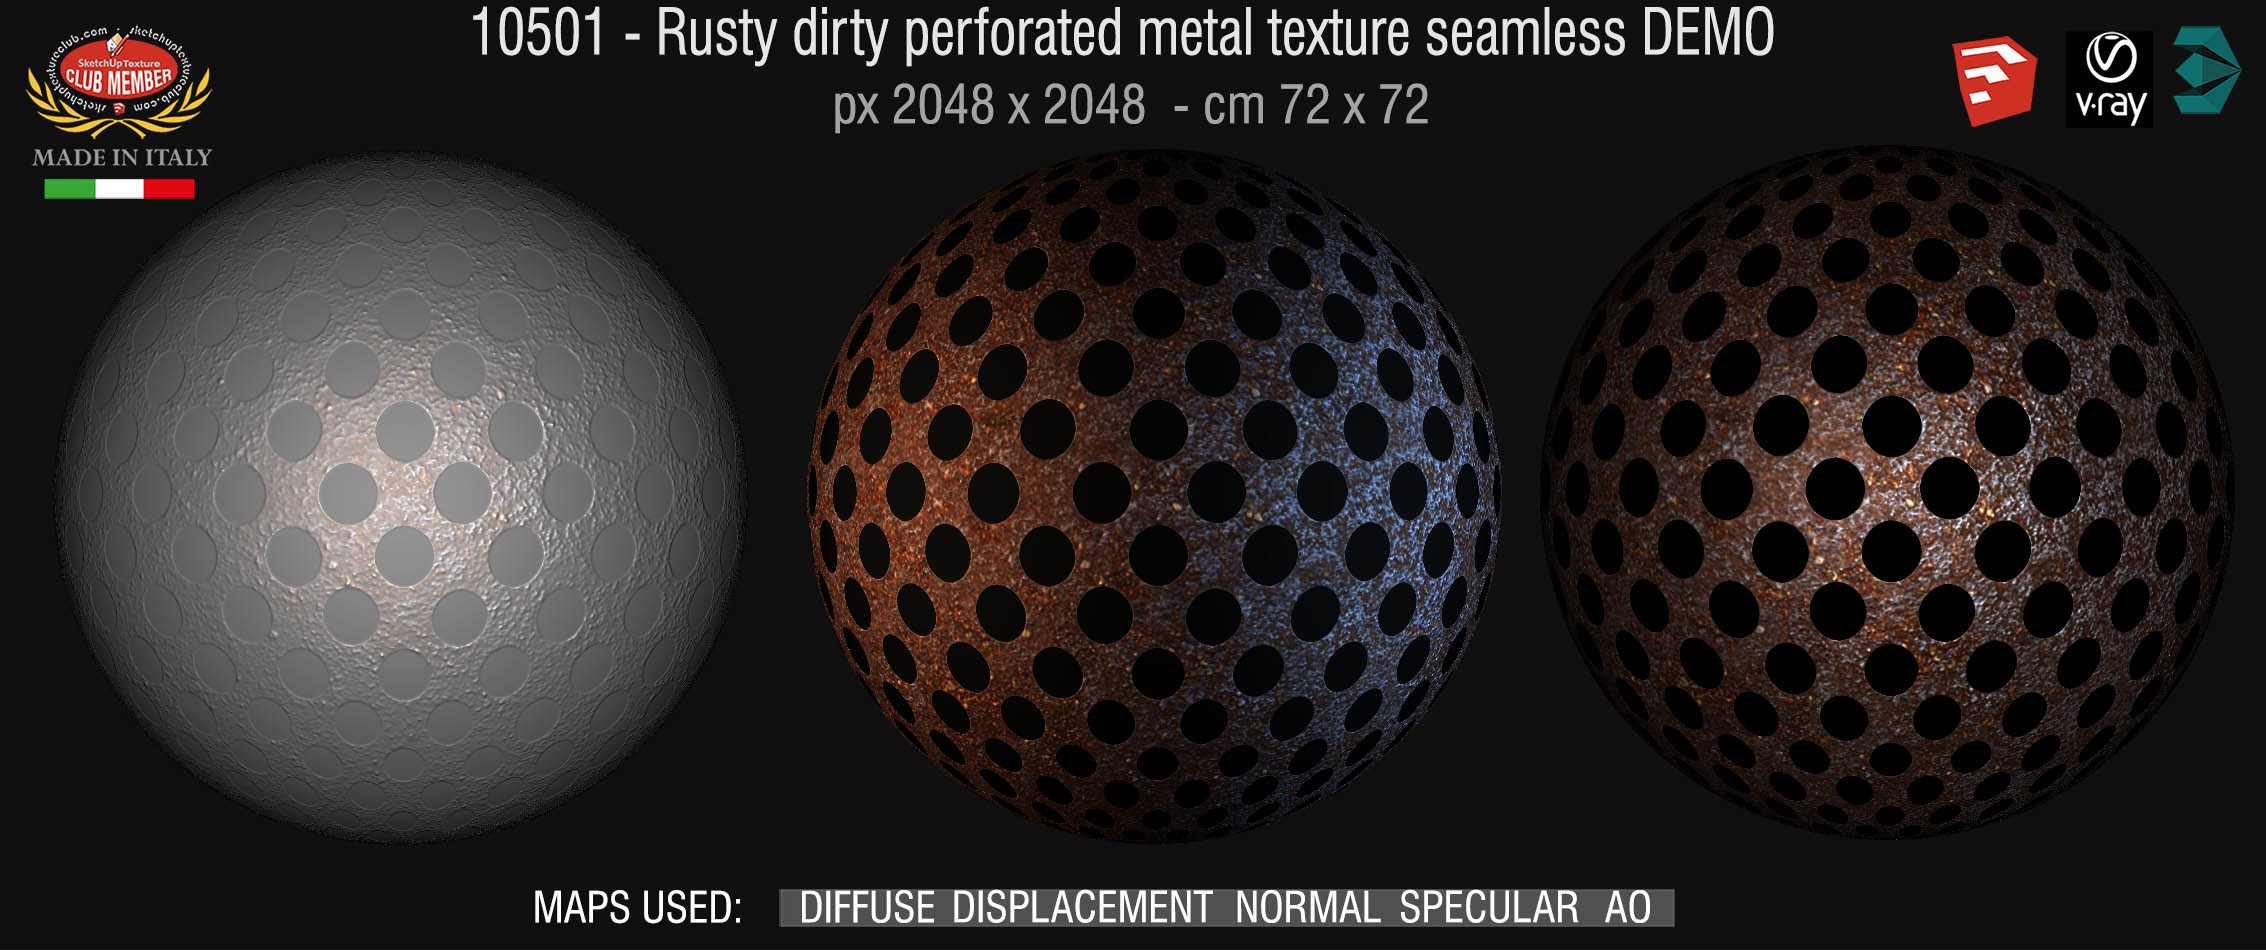 10501 HR Rusty dirty perforated metal texture seamless + maps DEMO